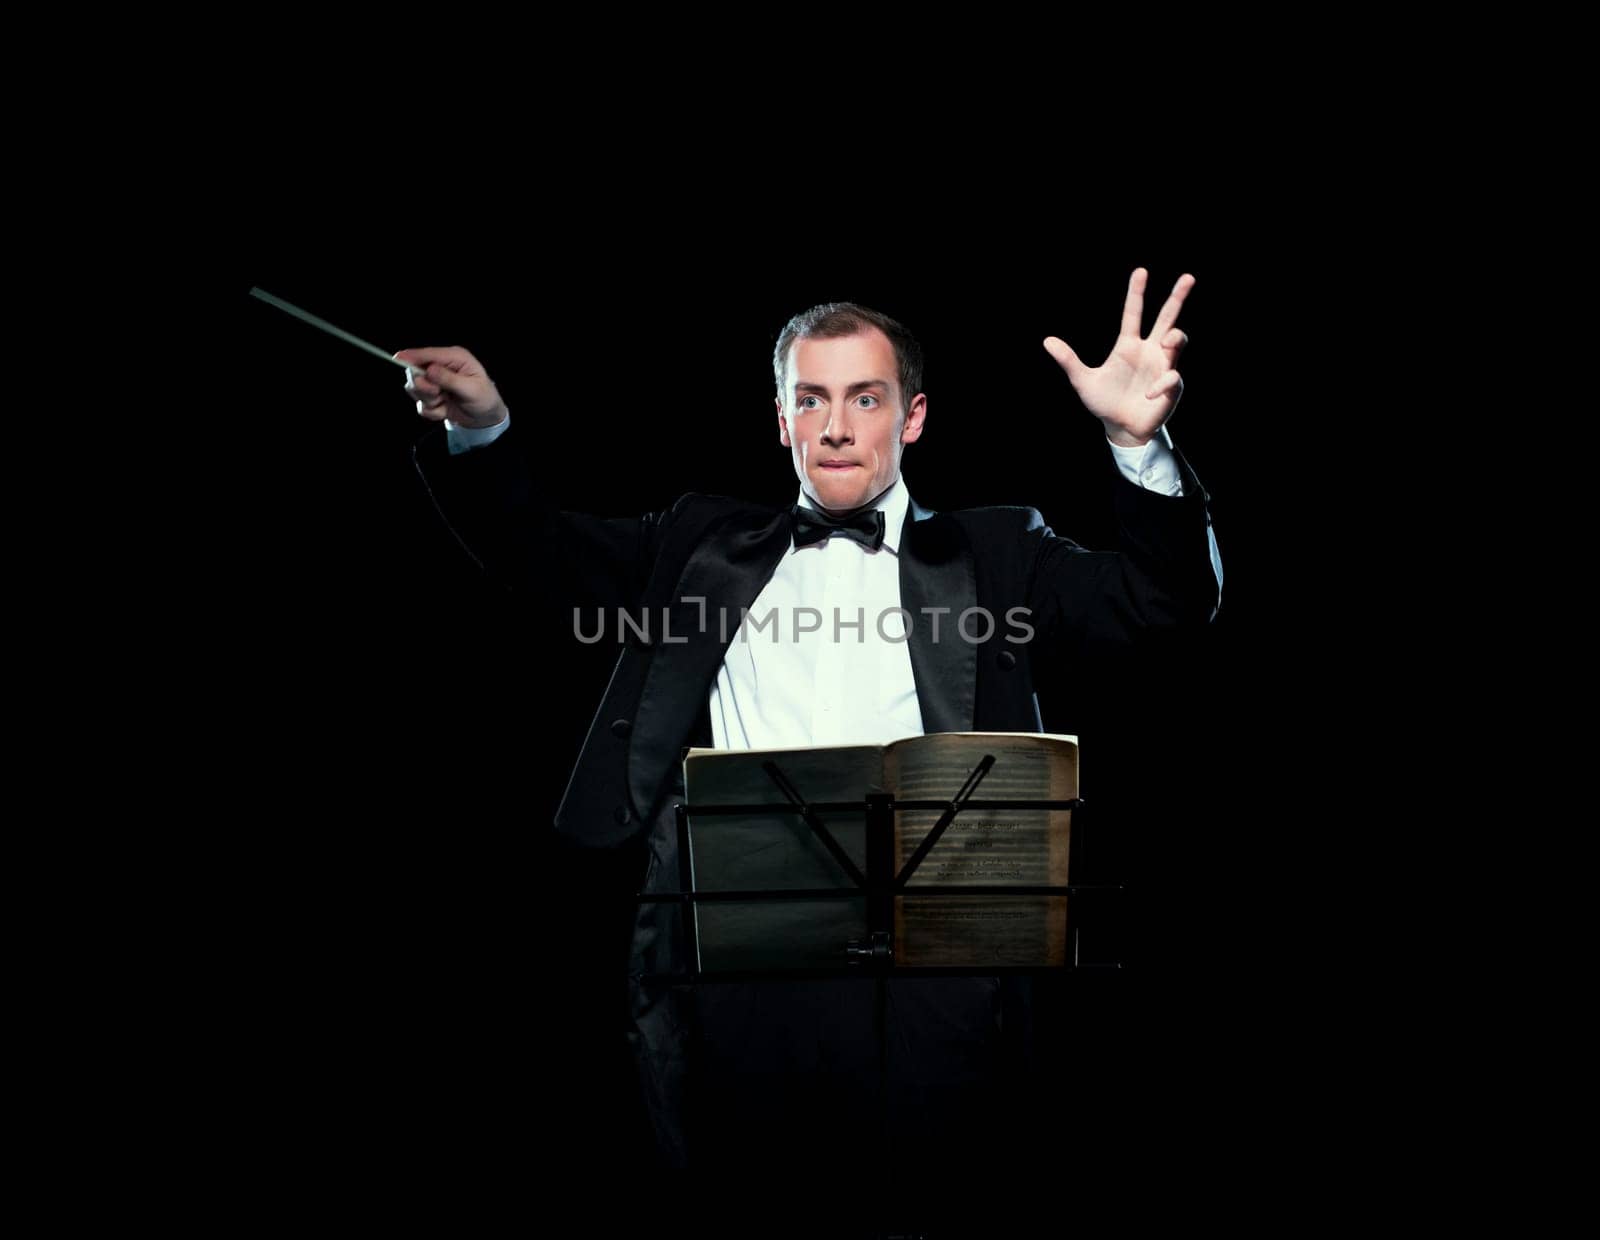 Studio photo of music director conducting with inspiration